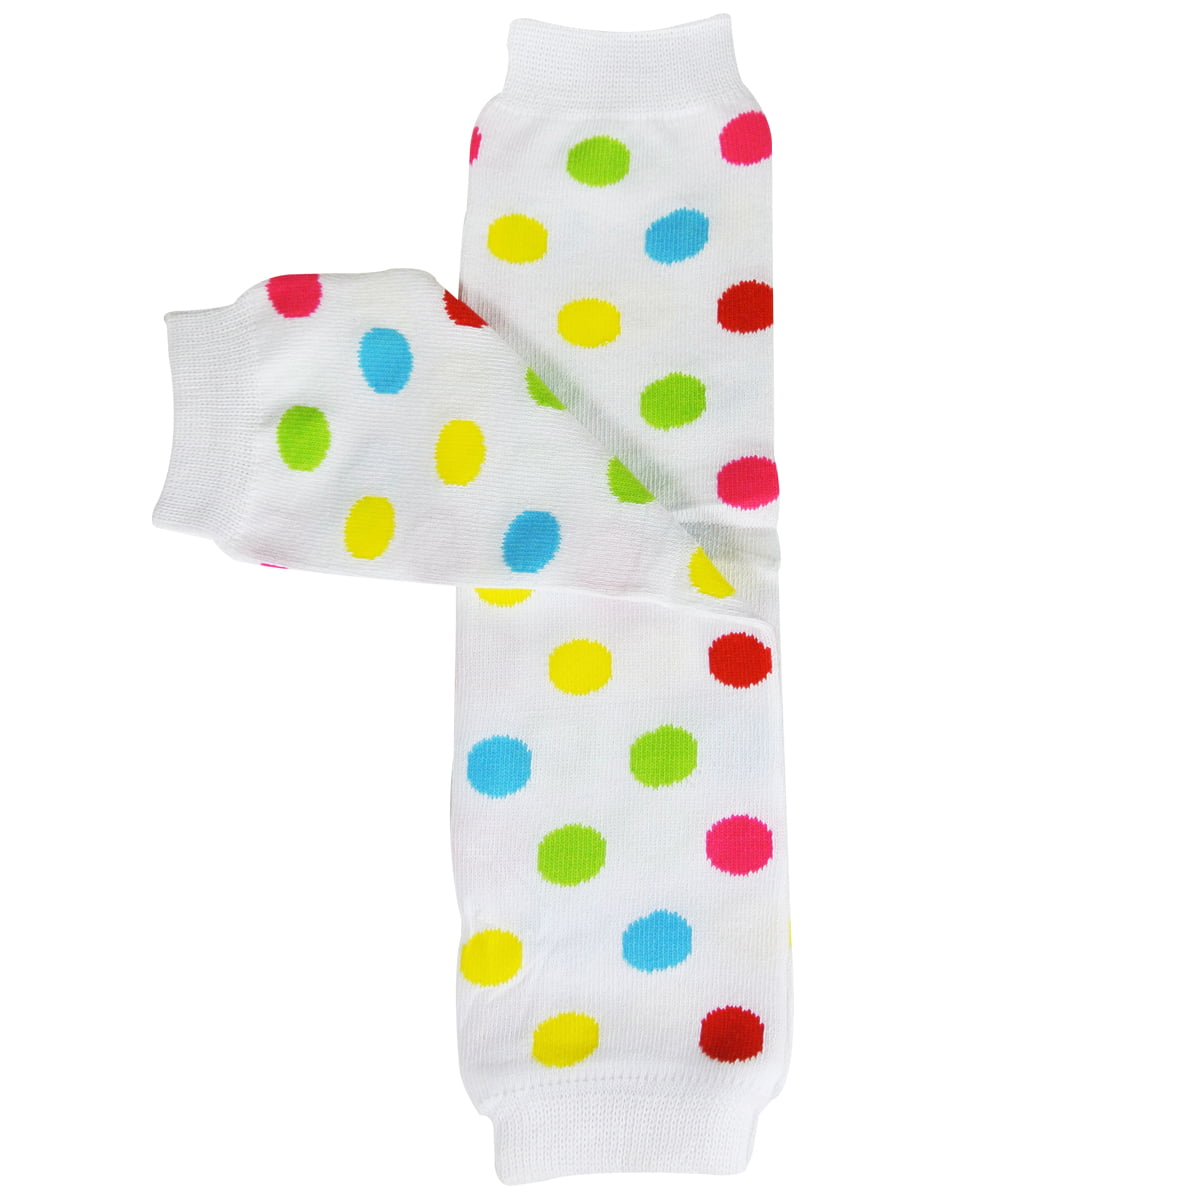 Bowbear Baby Polka Dot and Solid Color Leg Warmers 